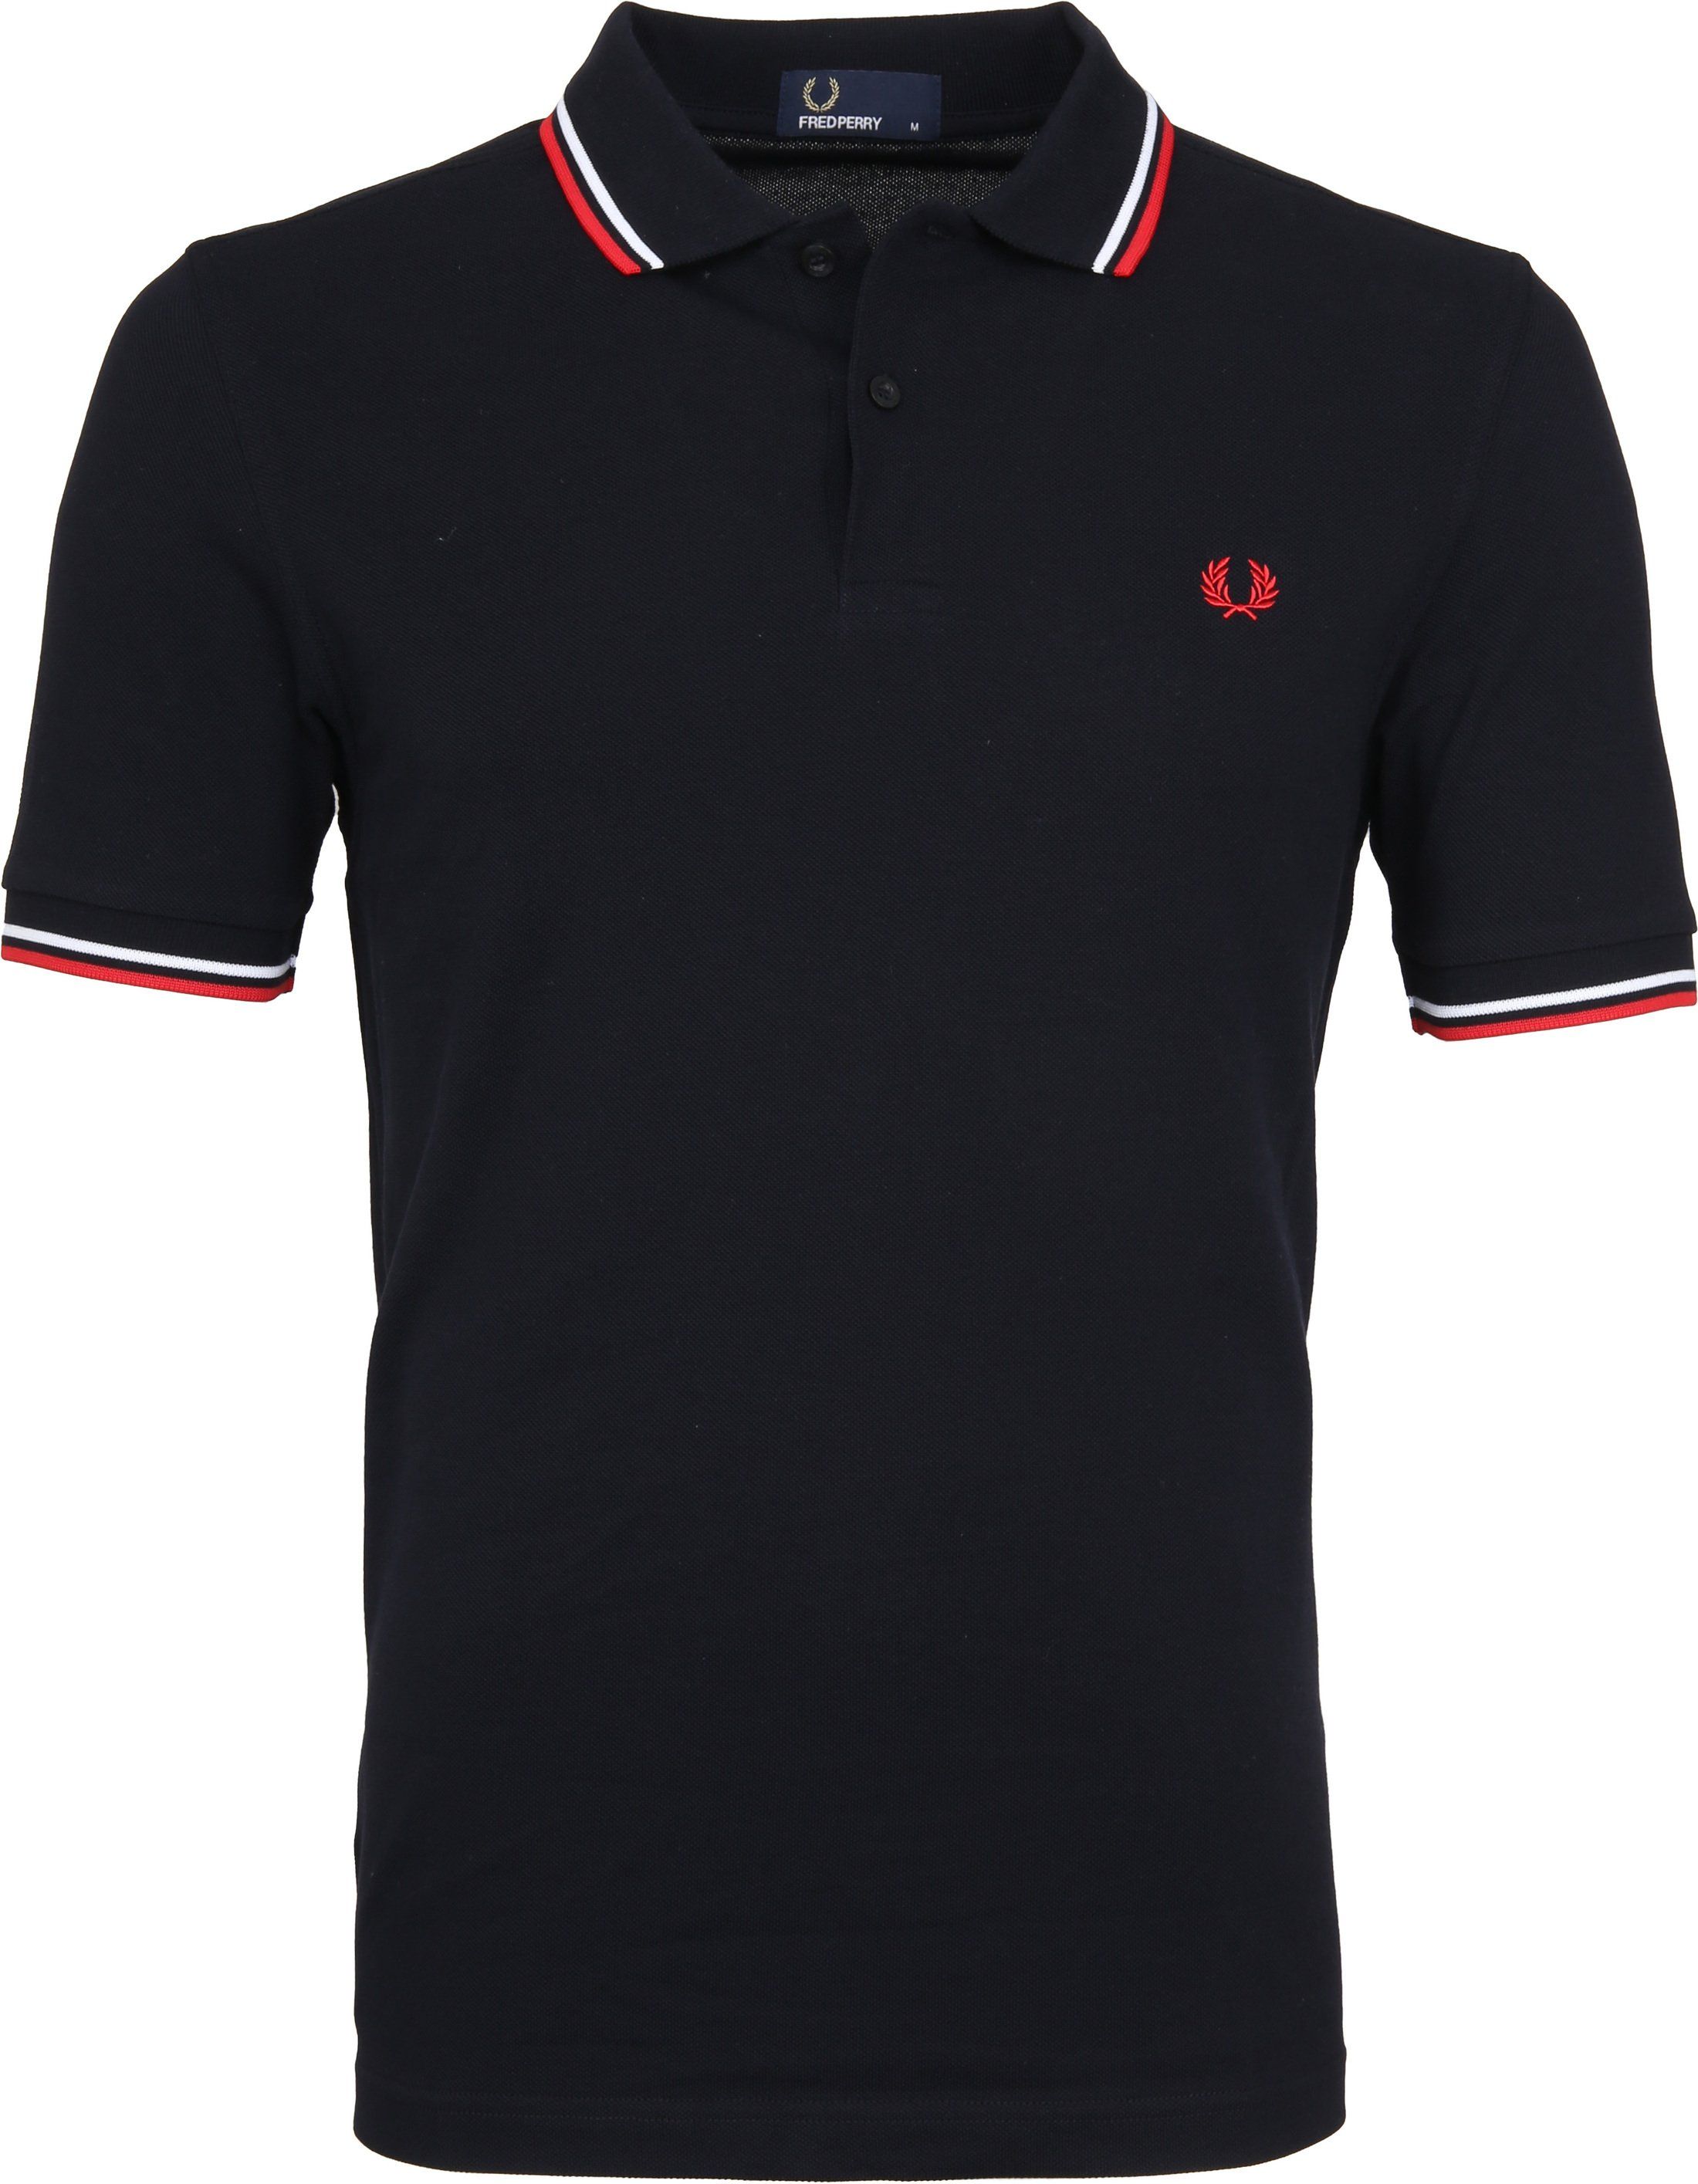 Fred Perry Polo Shirt Navy White Red Dark Blue Blue size S